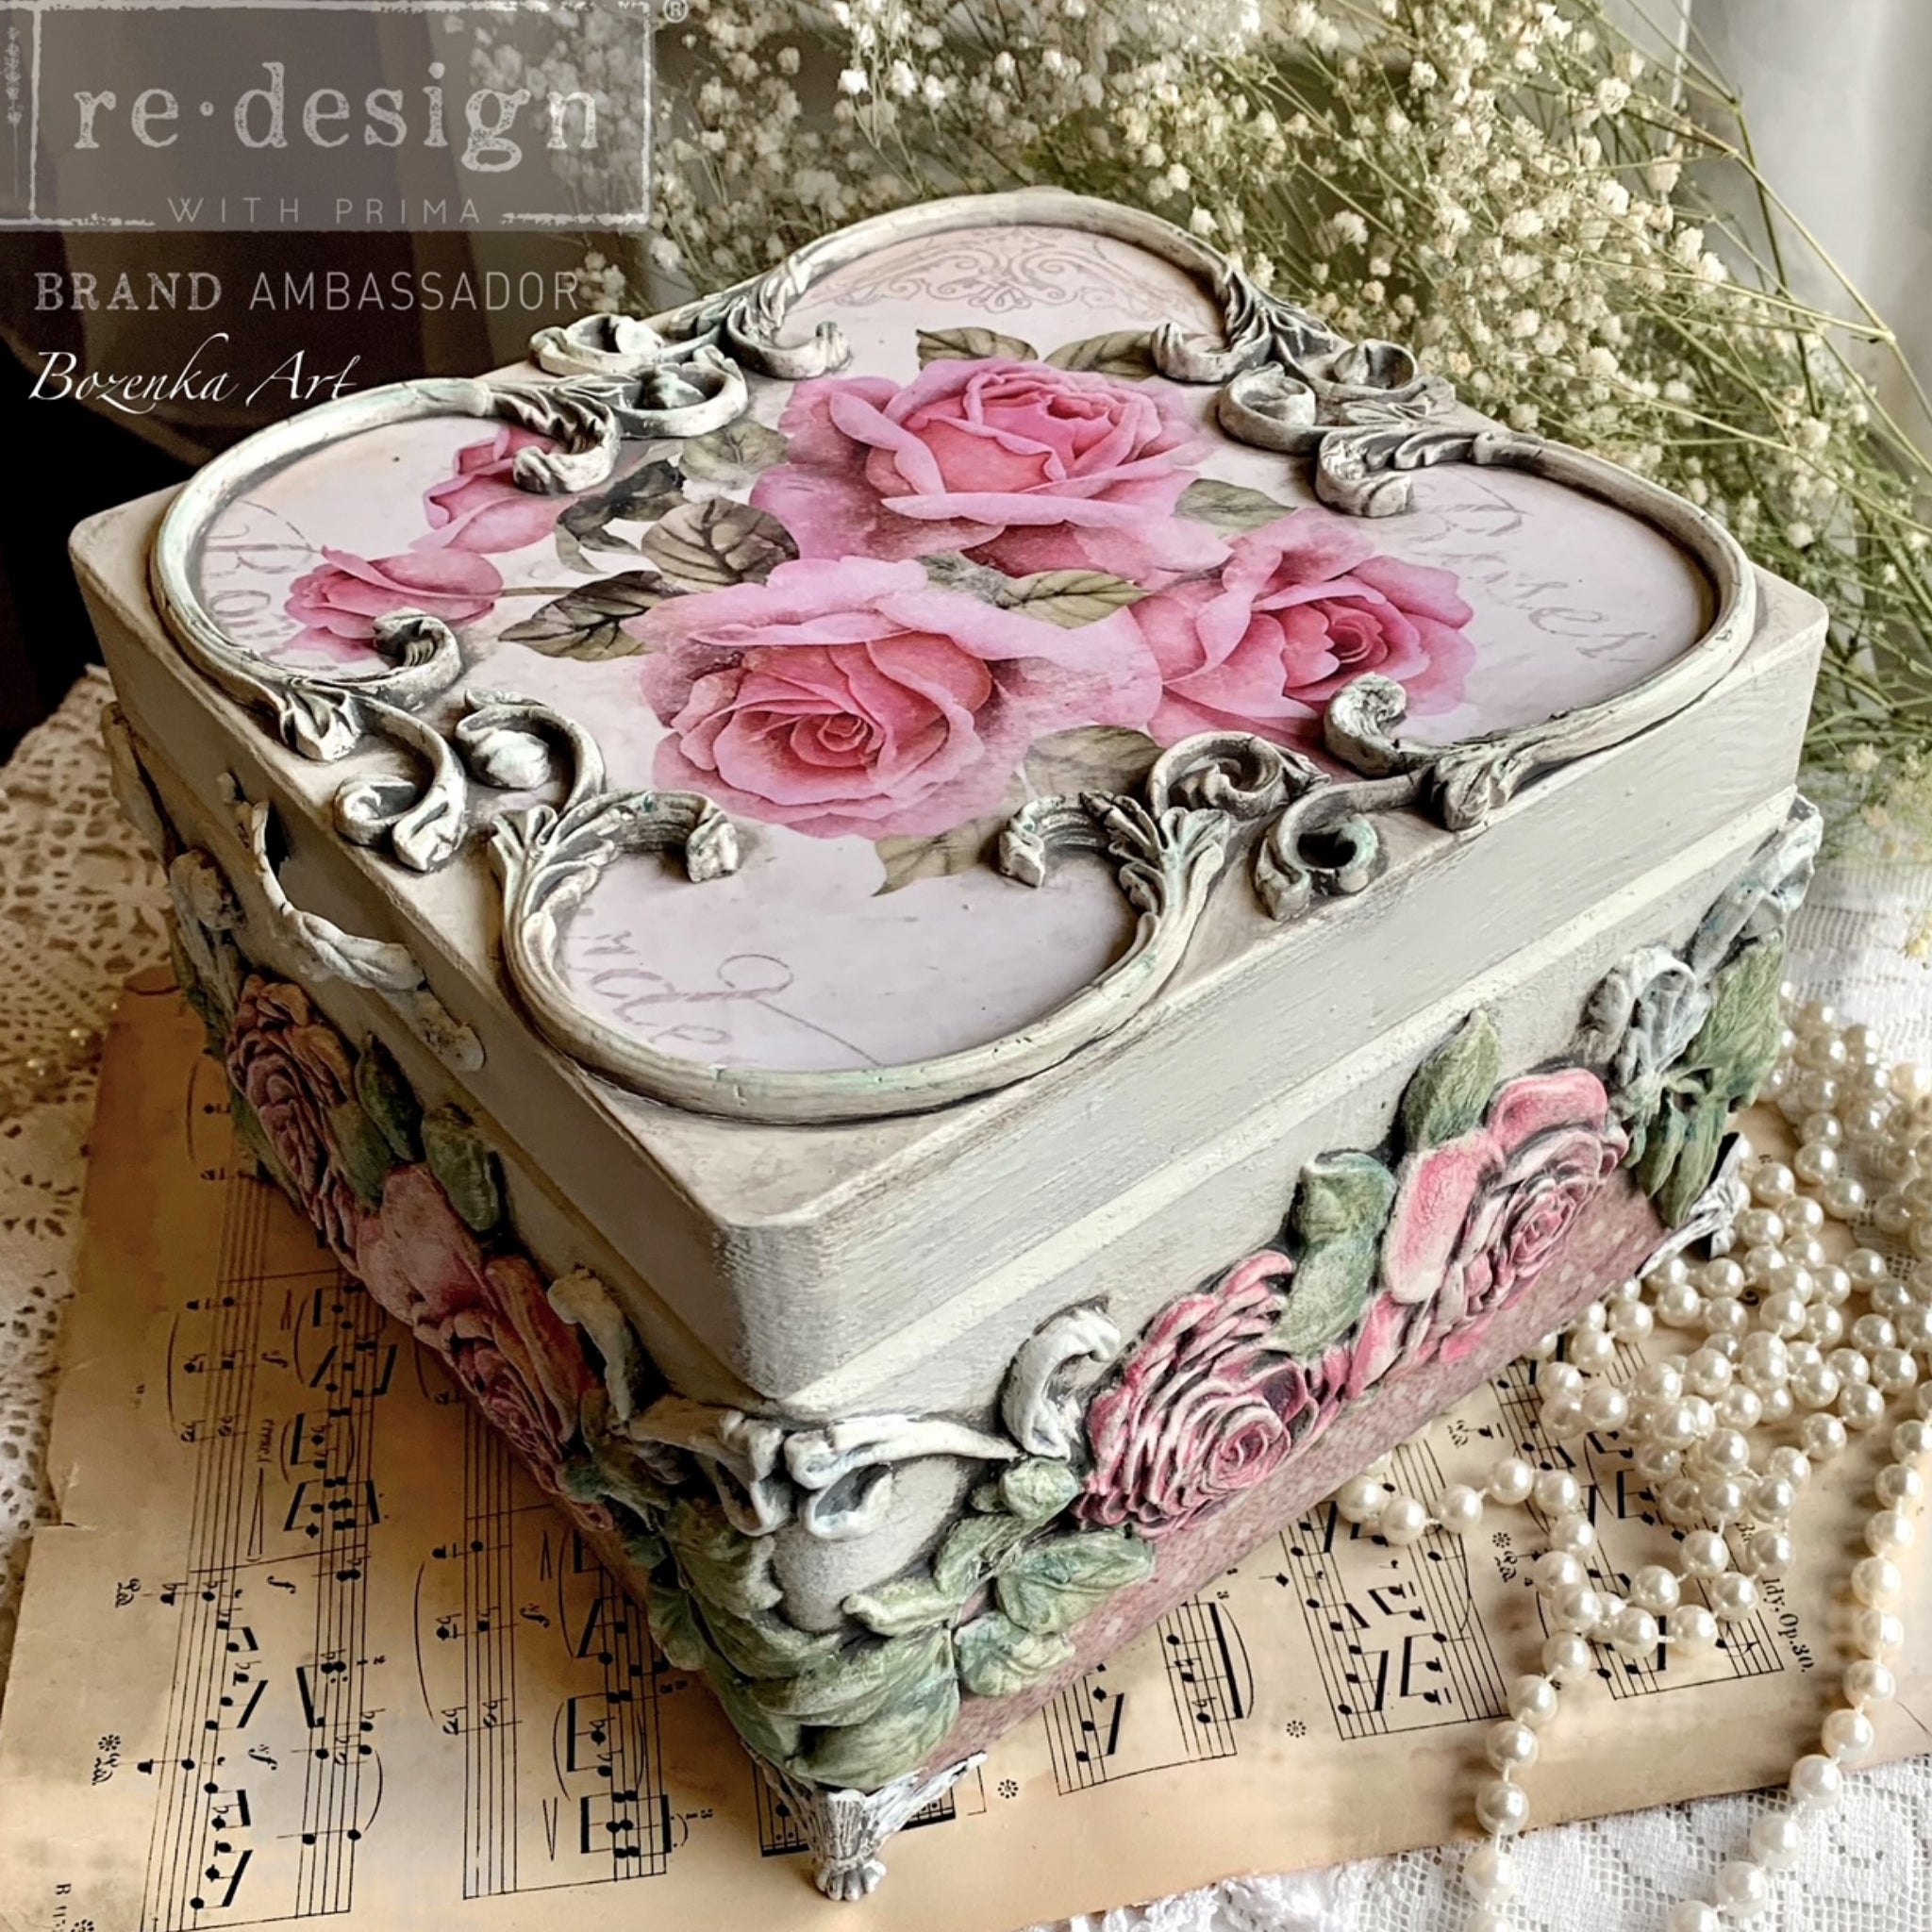 A small box refurbished by Bozenka Art is decorated with ReDesign with Prima's Victorian Rose silicone mould castings.